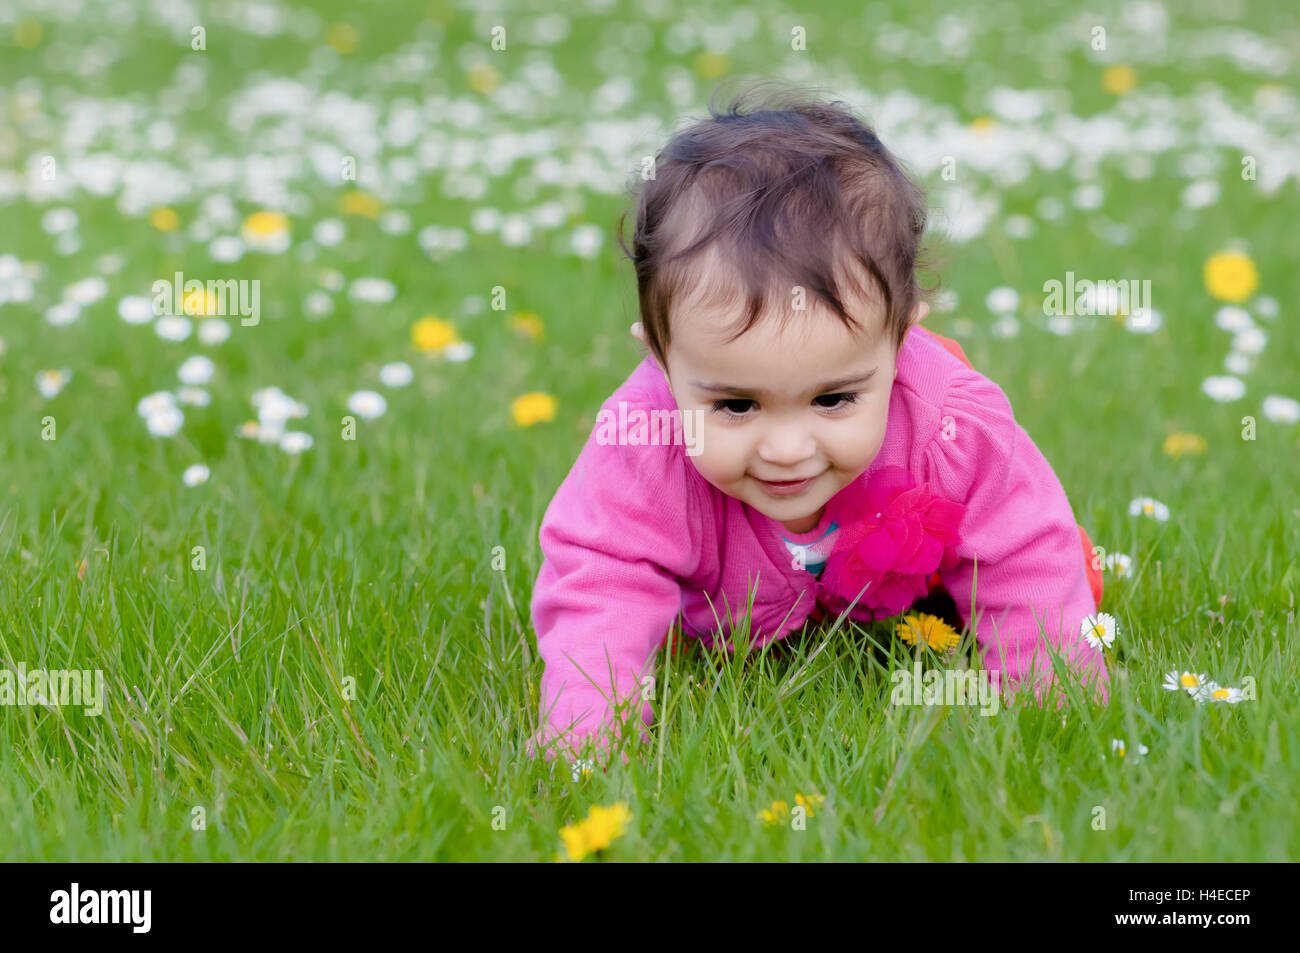 Cute chubby toddler crawling on the grass exploring nature outdoors in the park Stock Photo